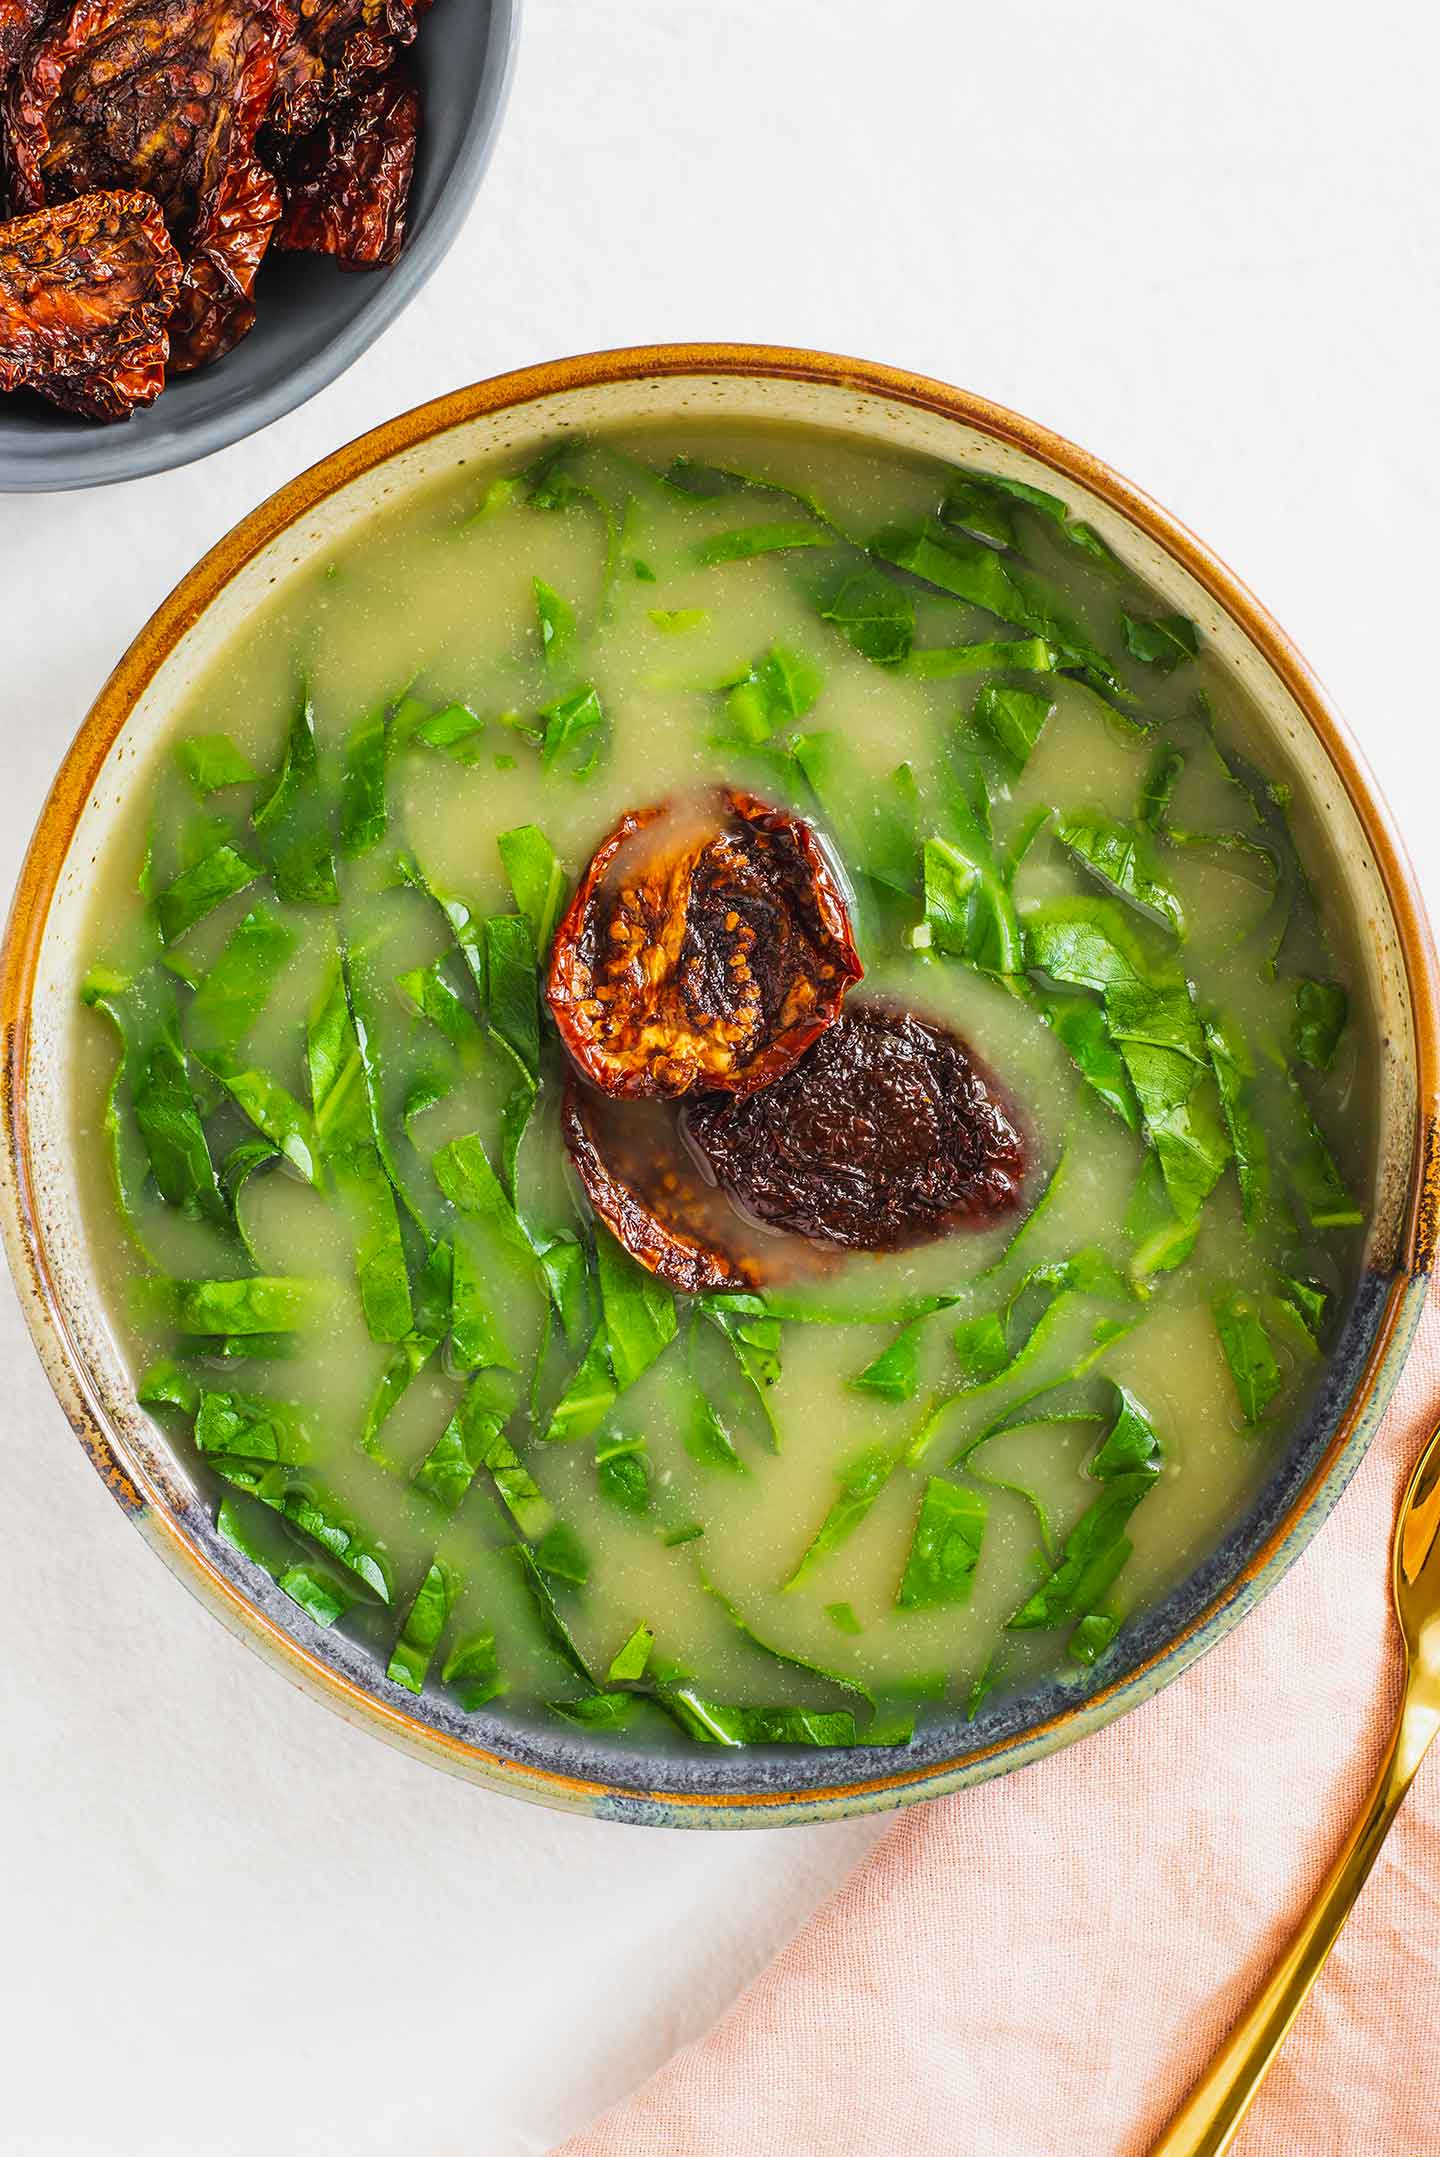 Portuguese caldo verde, collard soup, fills a wide shallow bowl. Shredded collard float in a thickened broth while three pieces of smoky sun-dried tomato decorate the center.